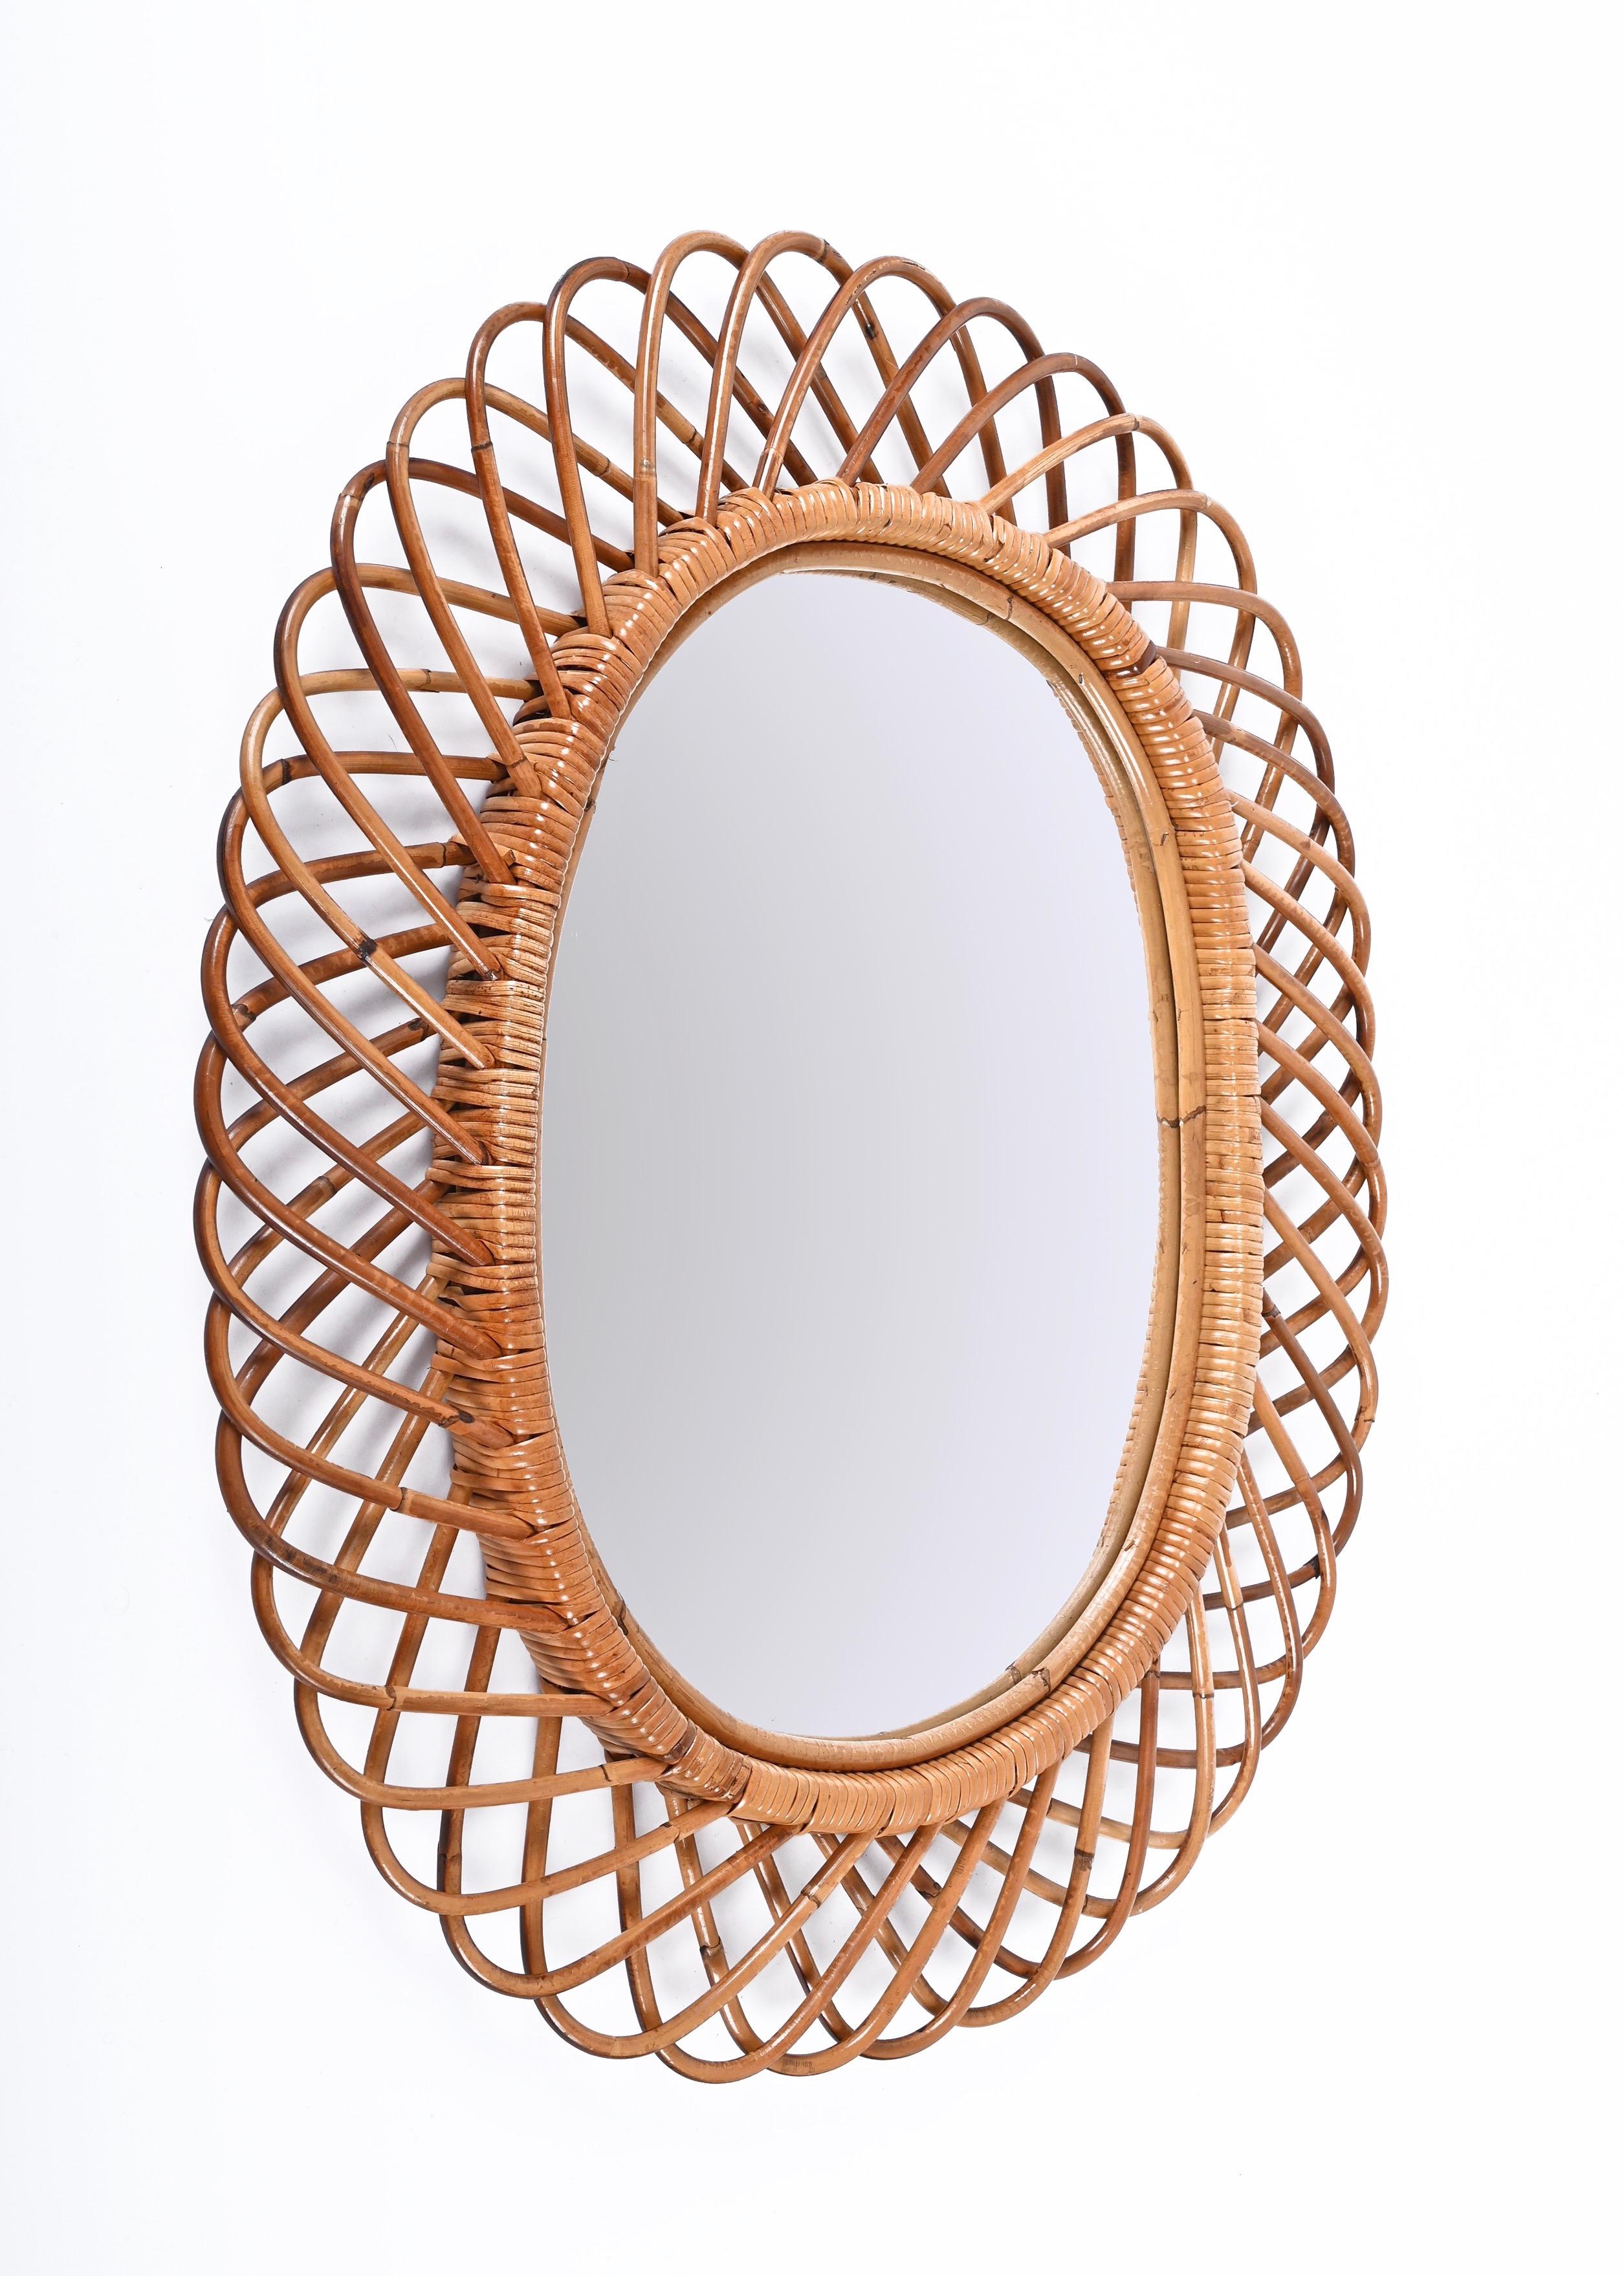 Amazing huge midcentury French Riviera rattan and bamboo oval mirror. This marvellous object is attributed to Franco Albini as designer and Bonacina and was produced in Italy during the 1960s.

This decorative oval mirror is unique as it has a